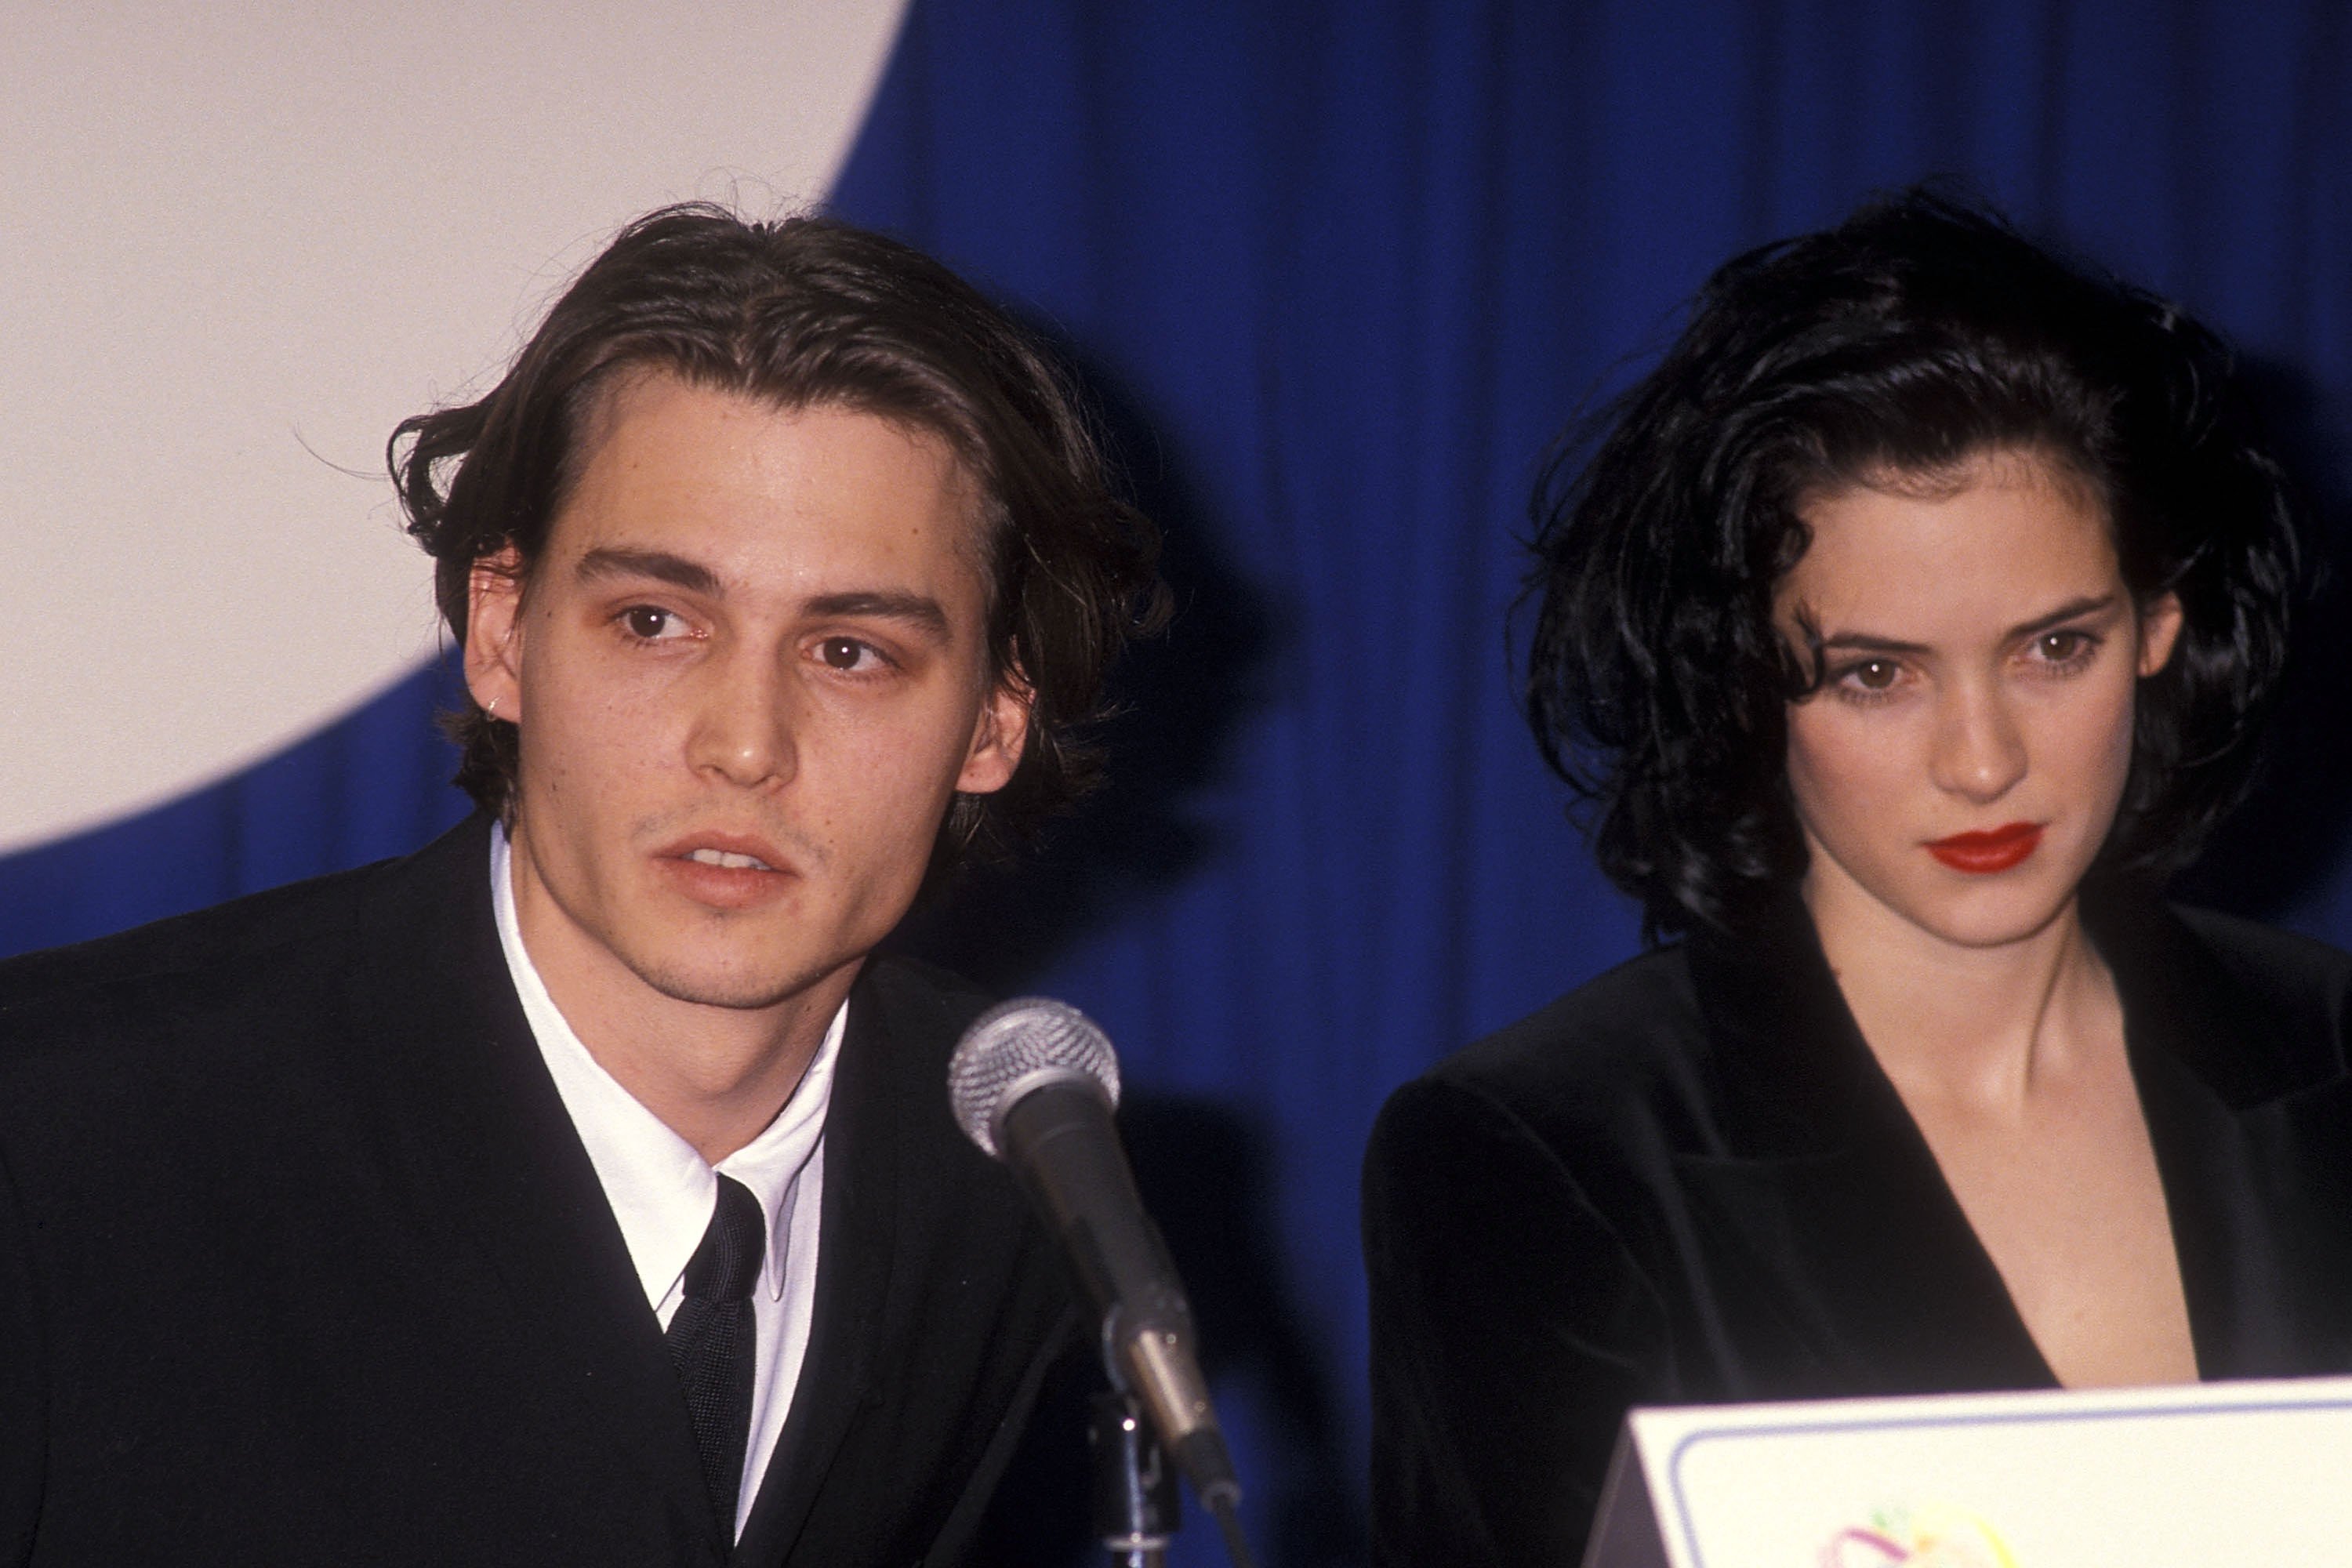 Johnny Depp and Winona Ryder at the NATO/ShoWest Convention on February 8, 1990, in Las Vegas, Nevada. | Source: Ron Galella, Ltd./Ron Galella Collection/Getty Images